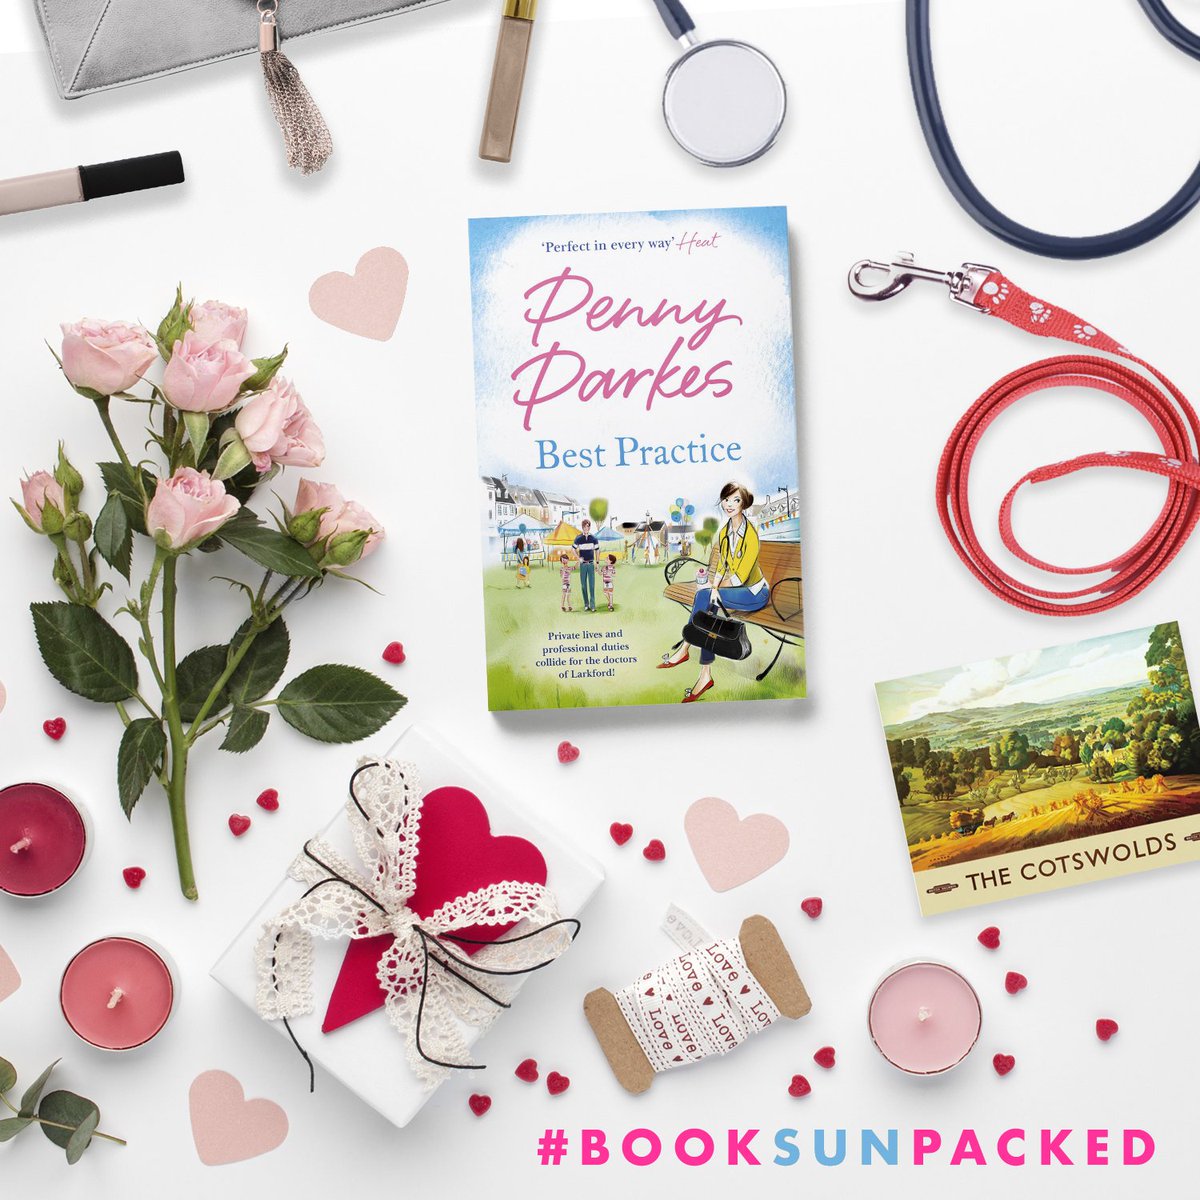 Love, laughter, dashing doctors and adorable dogs... What more do you need for a perfect summer read?! Make sure there's a copy of Best Practice by @CotswoldPenny in your suitcase (alongside those 3 extra pairs of shoes you won't wear)! #BOOKSUNPACKED